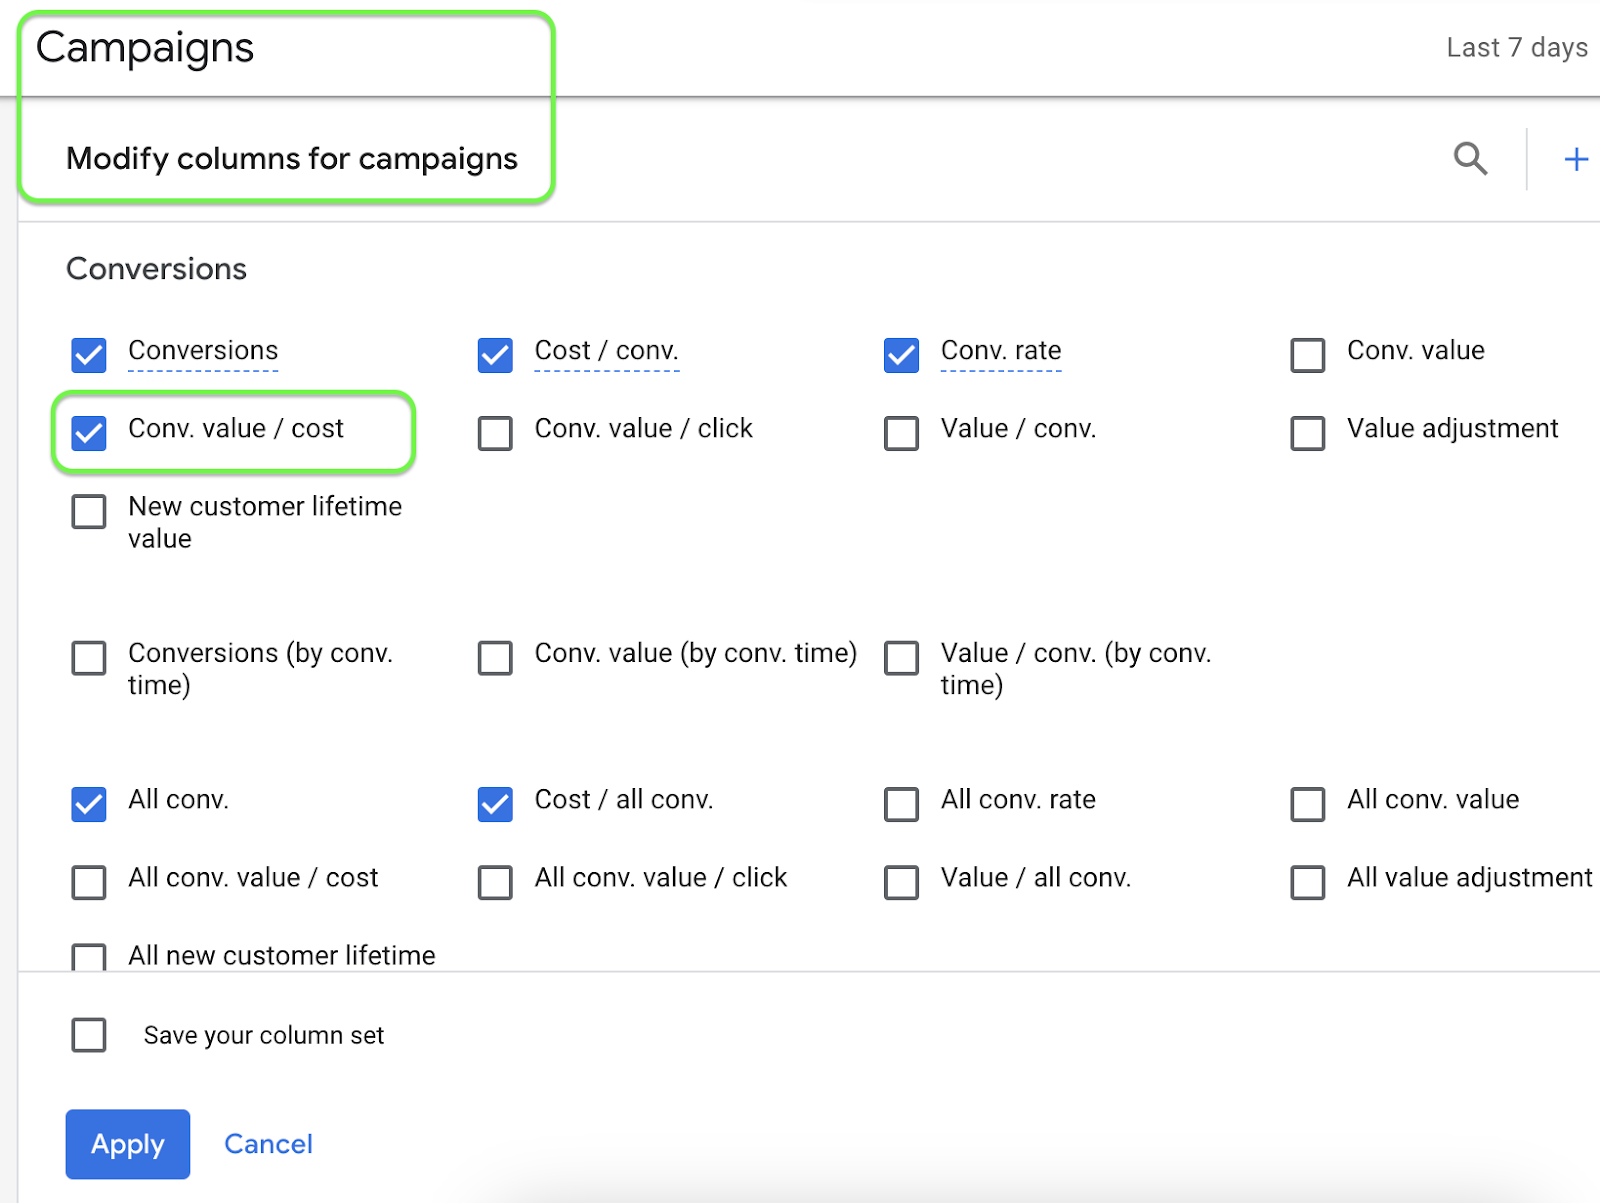 Adding the conversion value/cost column in Google ads for target ROAS campaign